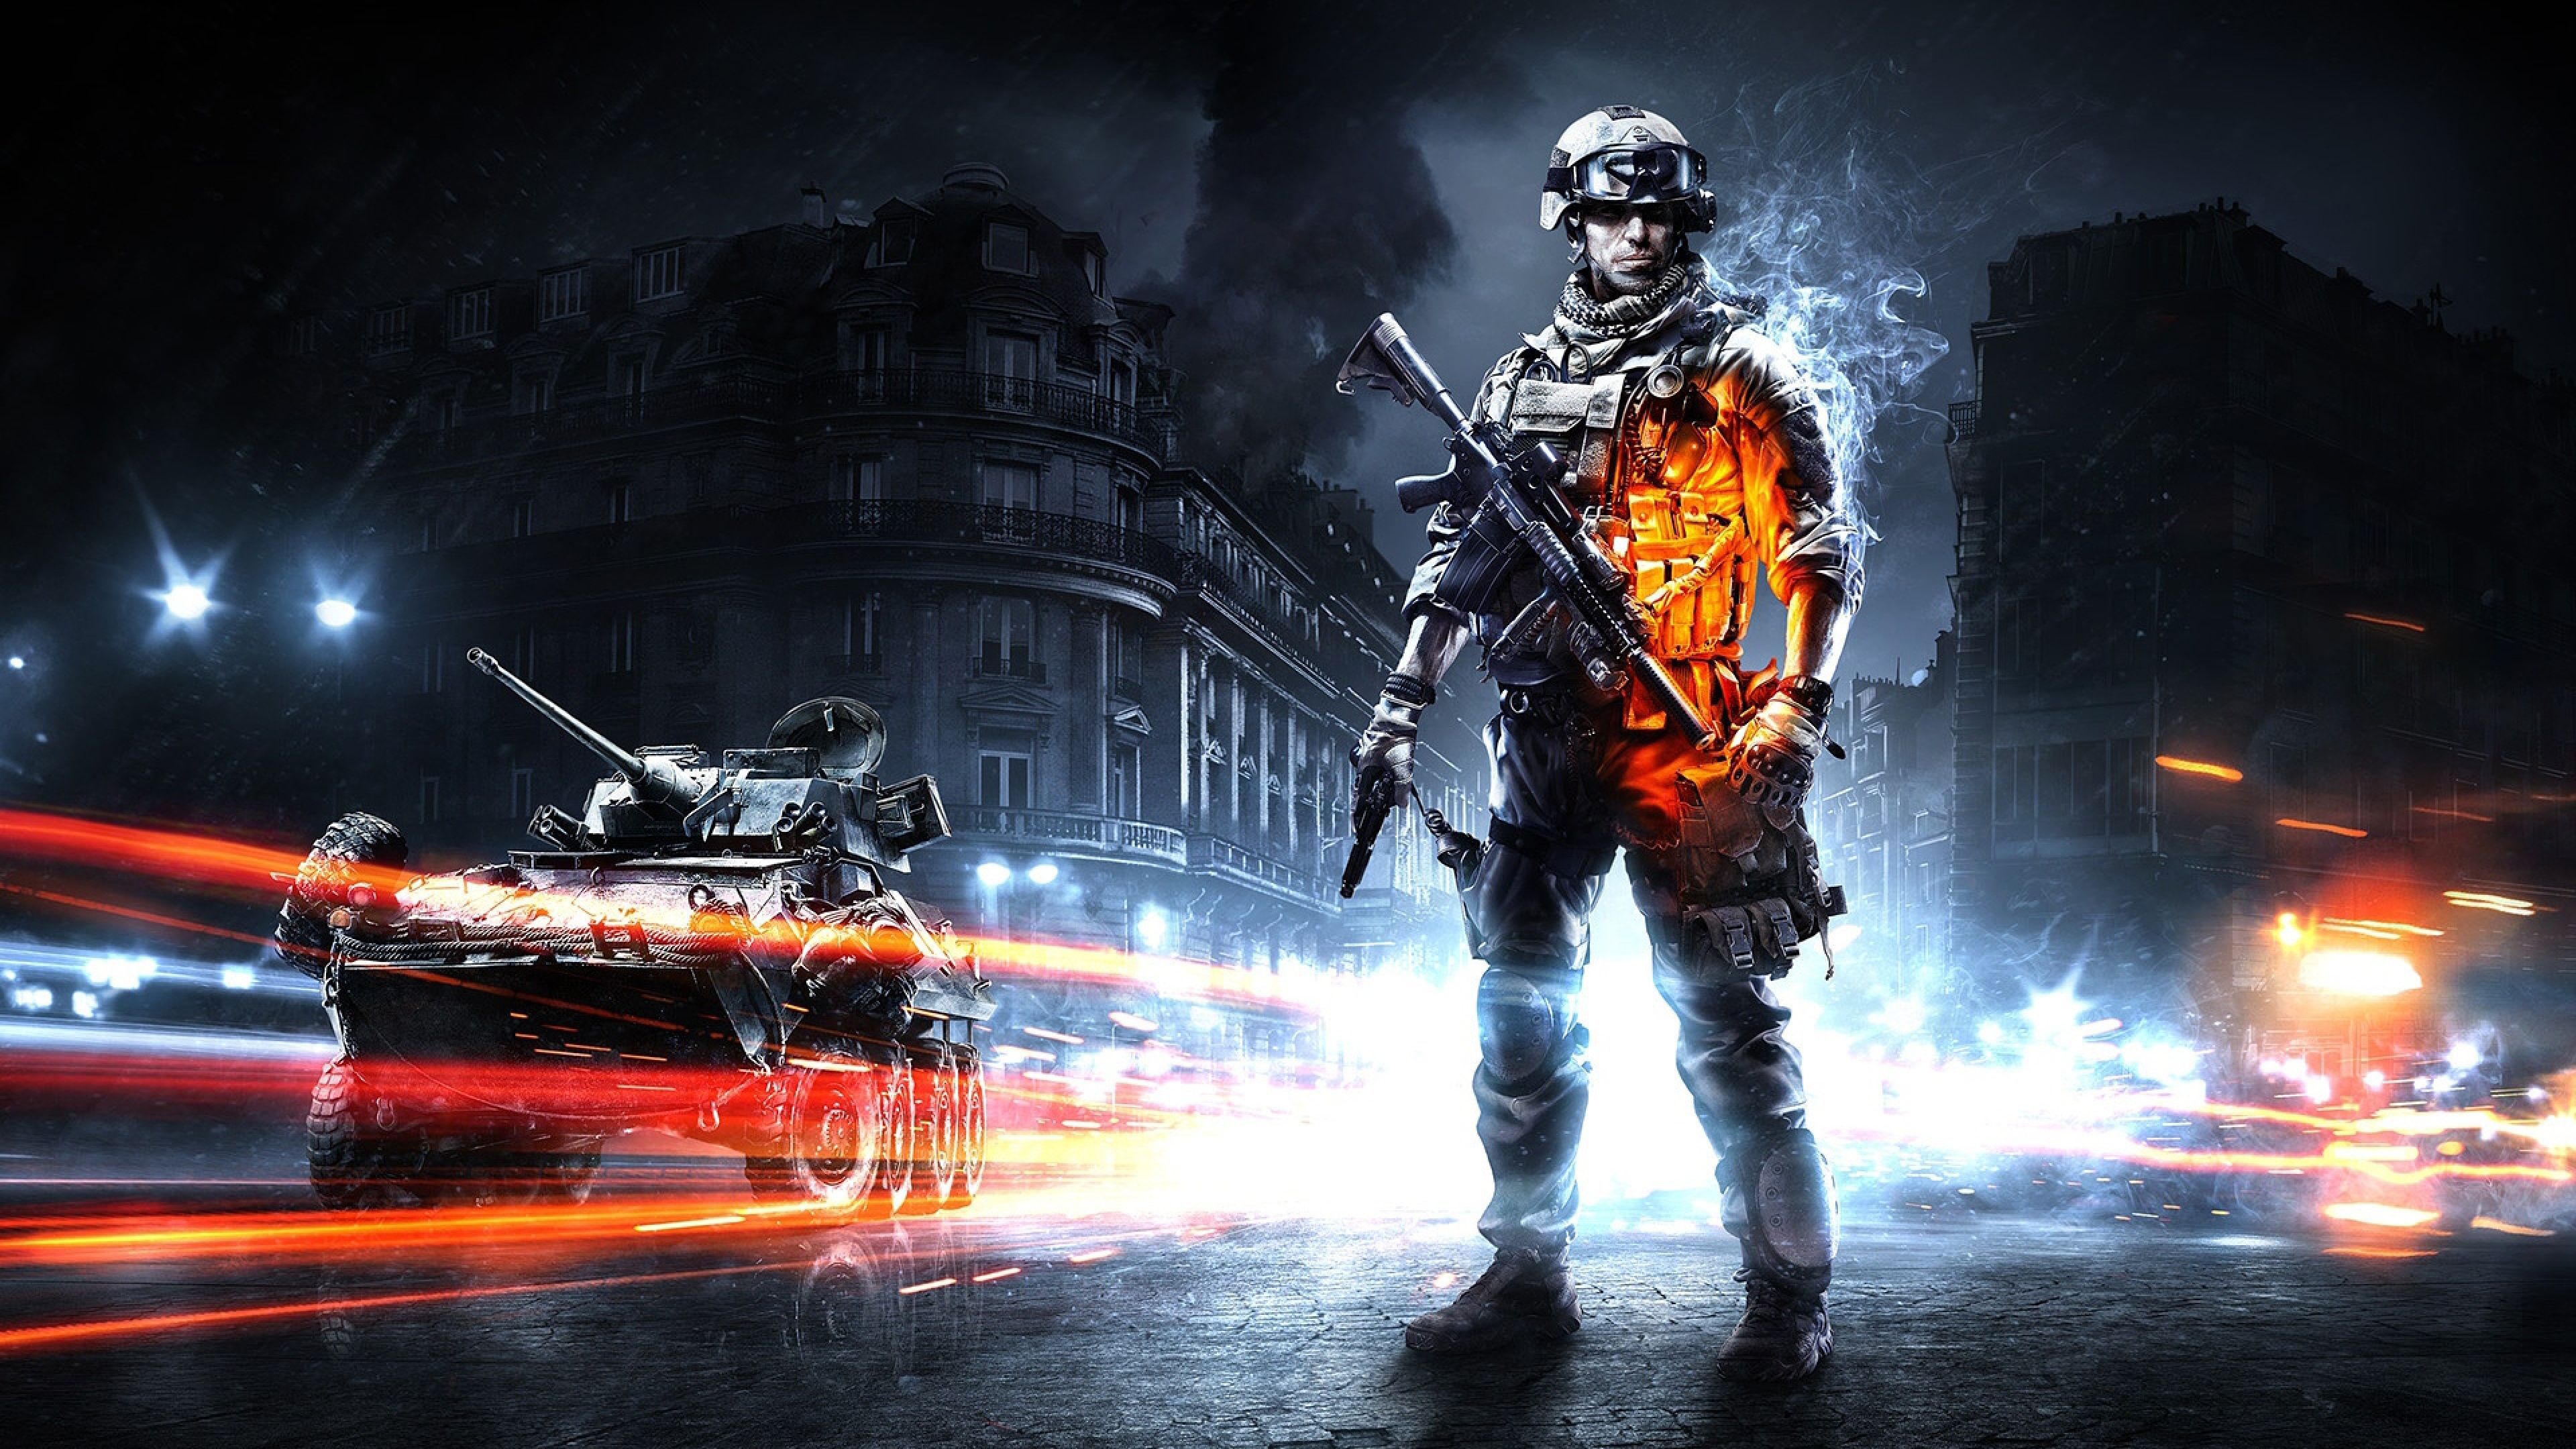 1080x1920  1080x1920 ea games battlefield 4 games pc games xbox games  ps4 games pc games for Iphone 6 7 8 wallpaper  Coolwallpapersme